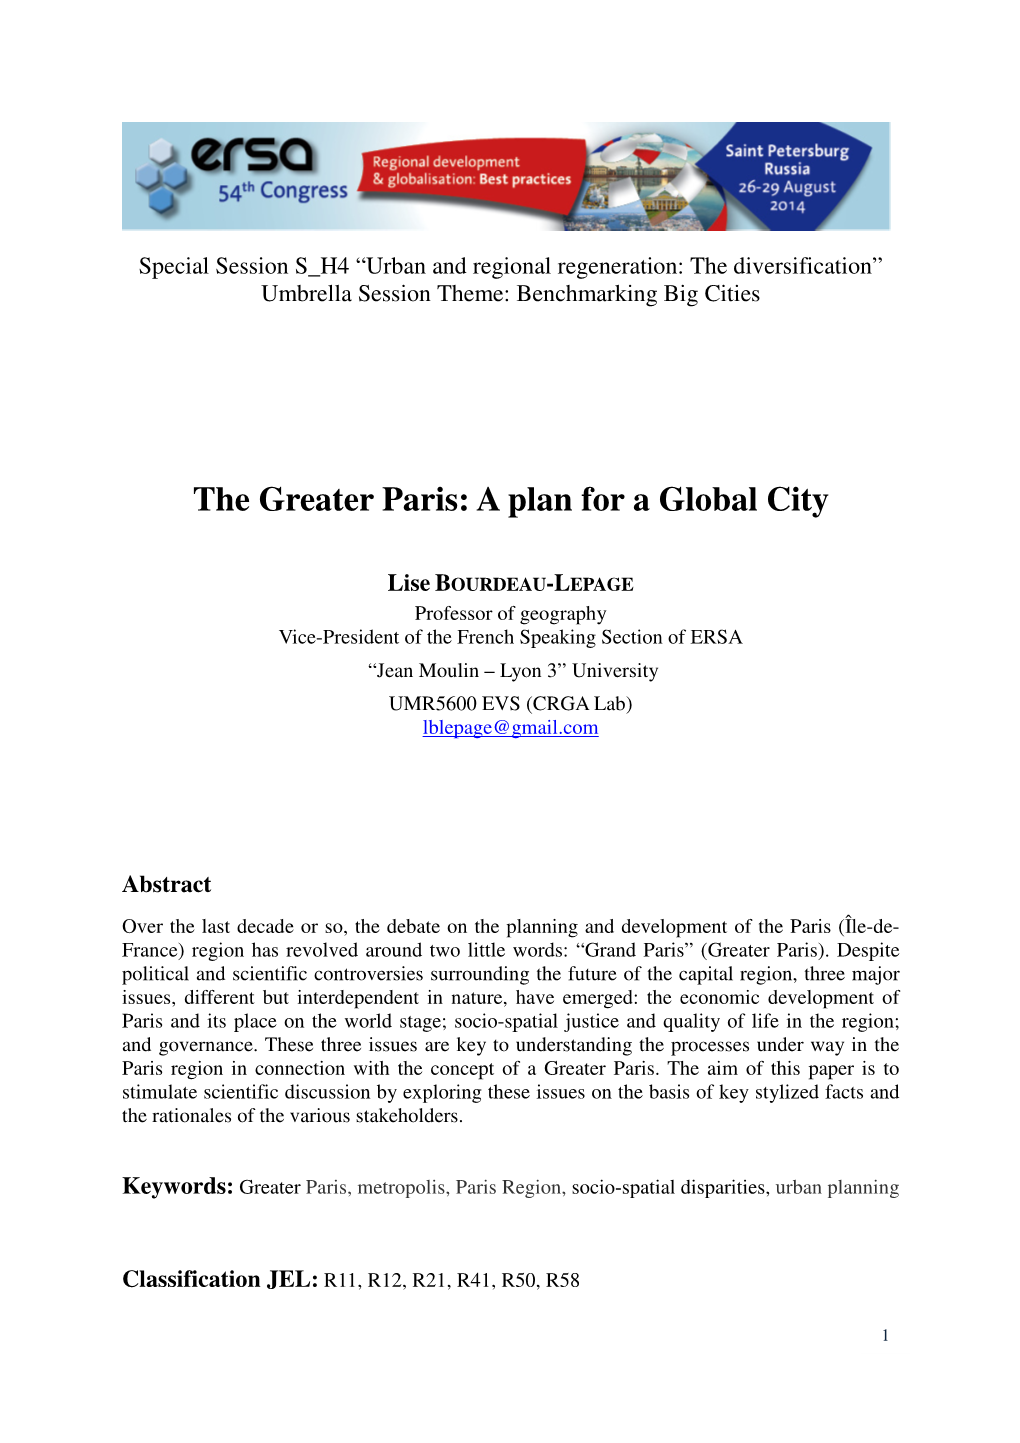 The Greater Paris: a Plan for a Global City